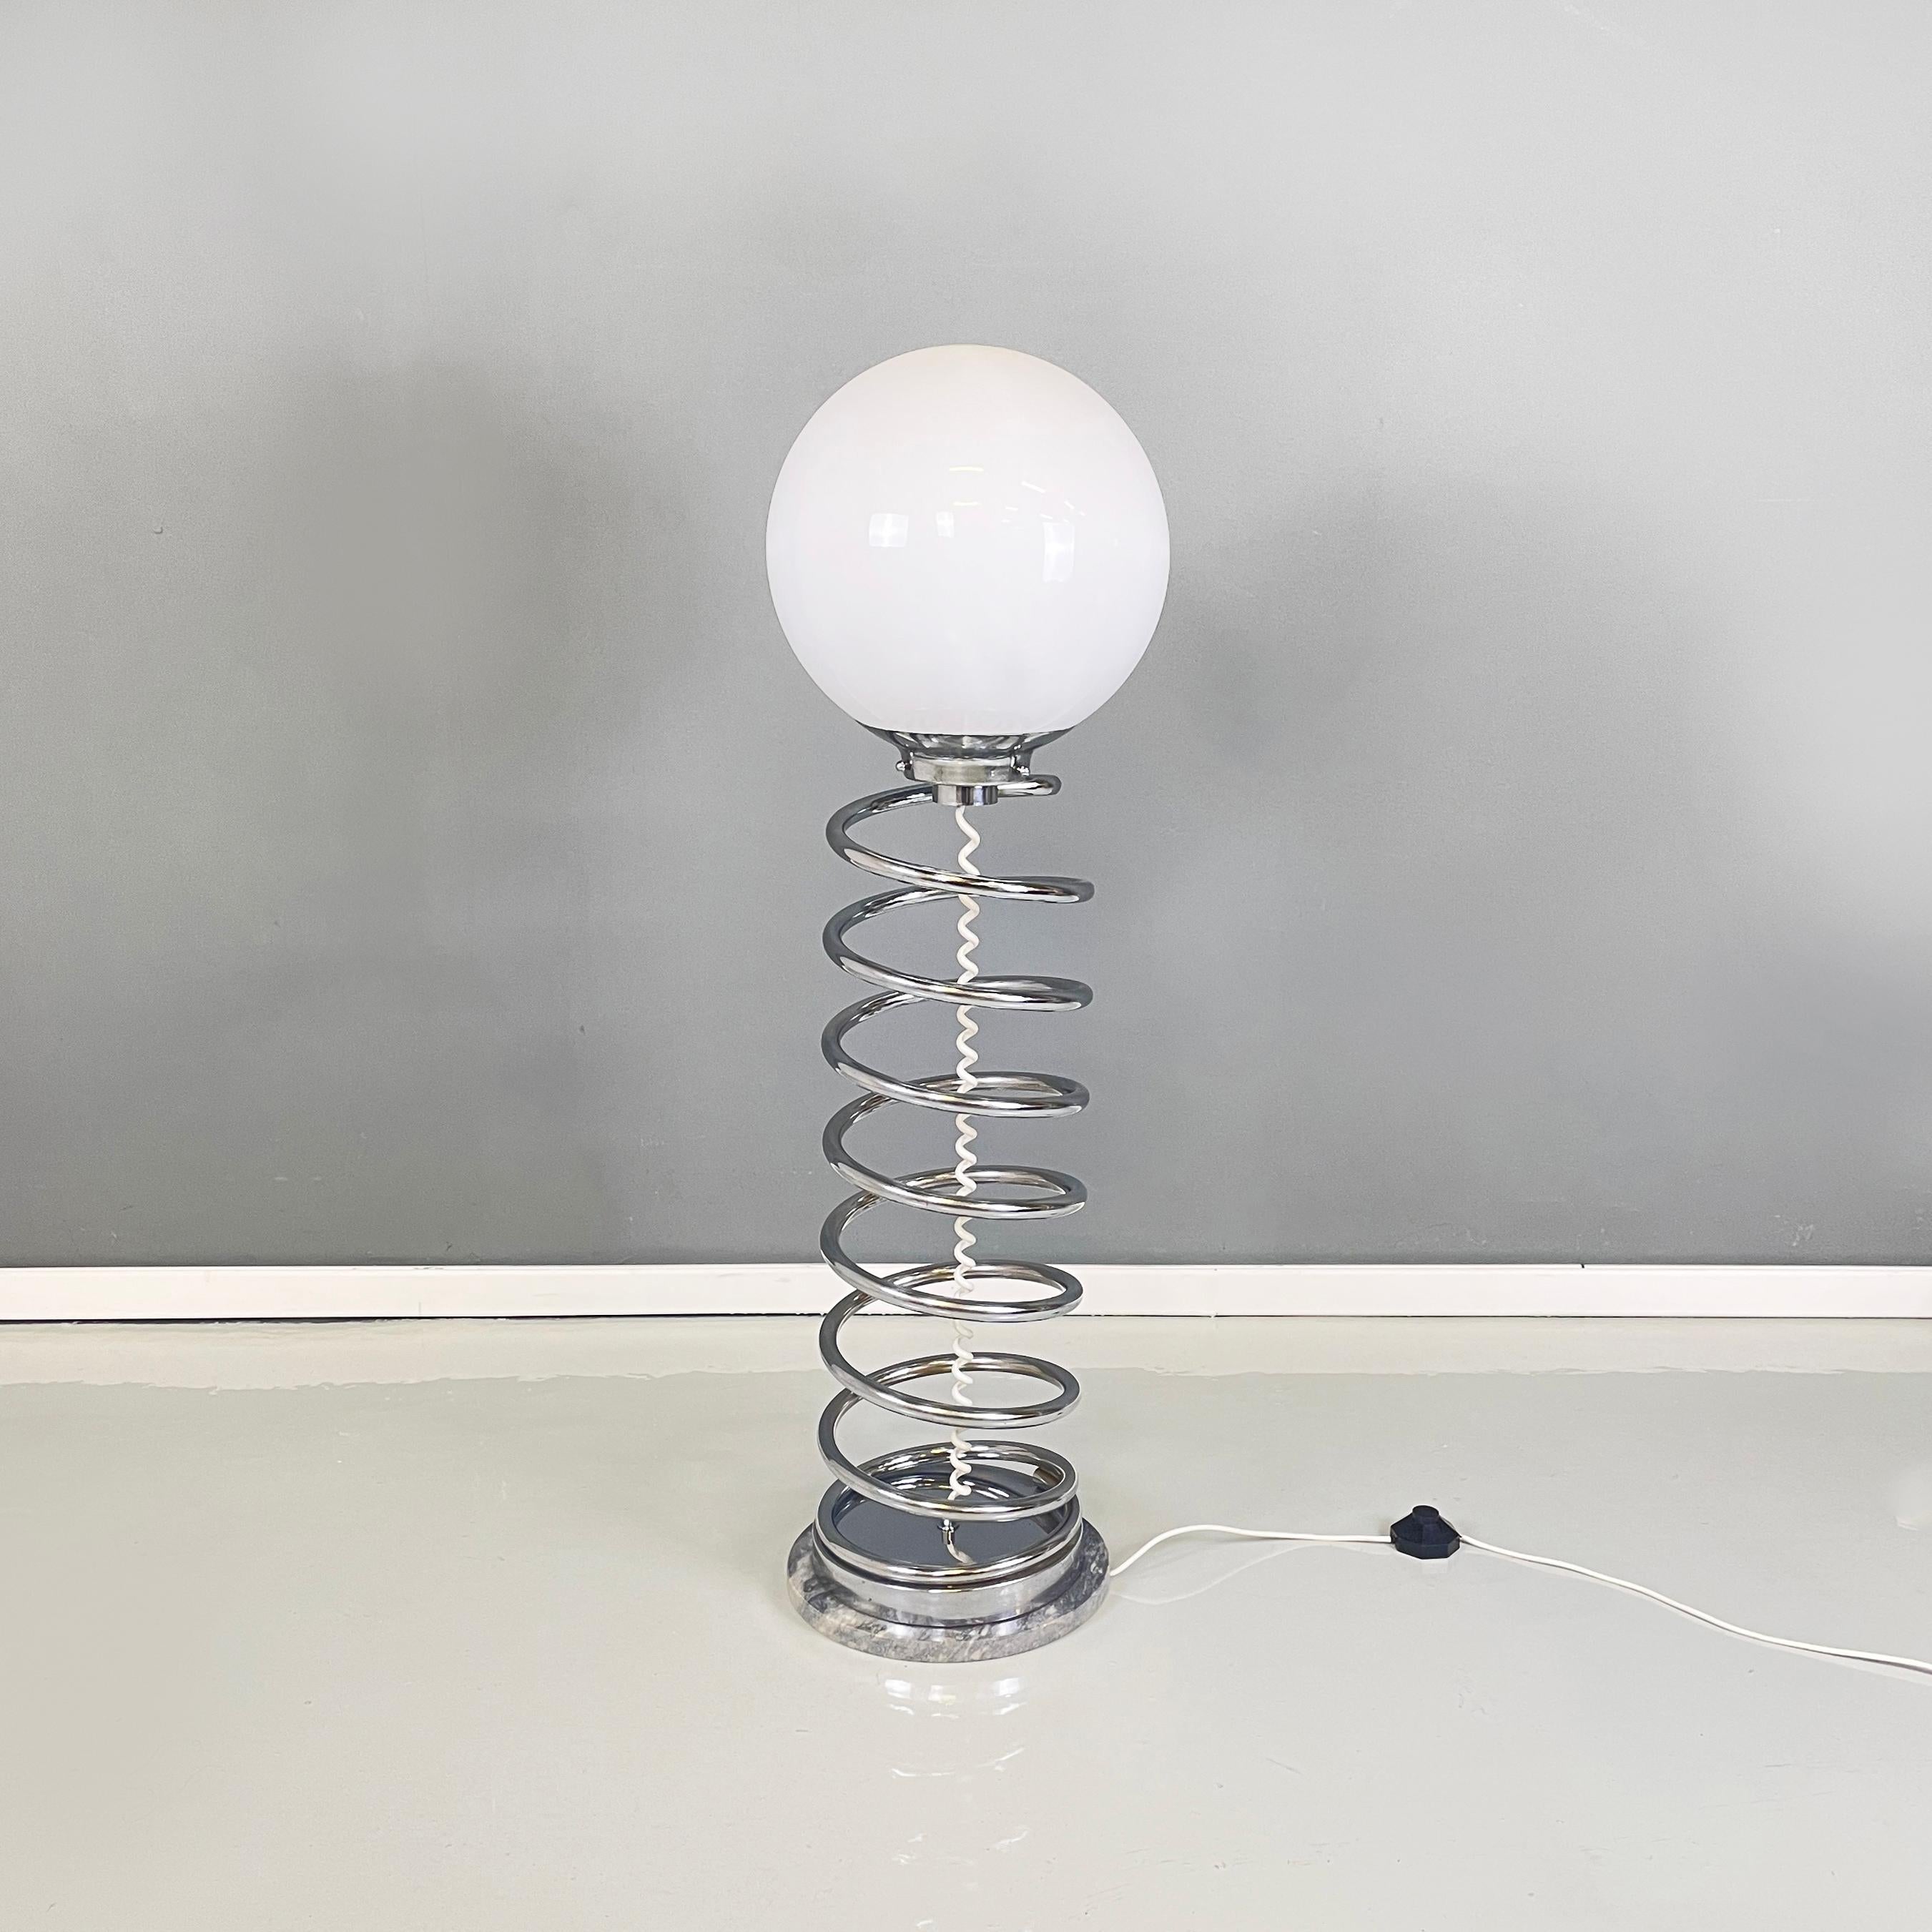 Italian space age modern Floor lamp with opaline glass, metal and gray marble, 1970s
Floor lamp with spherical opaline glass diffuser with internal decoration, visible only when turned on. The central structure is made of spring-shaped metal tubing.